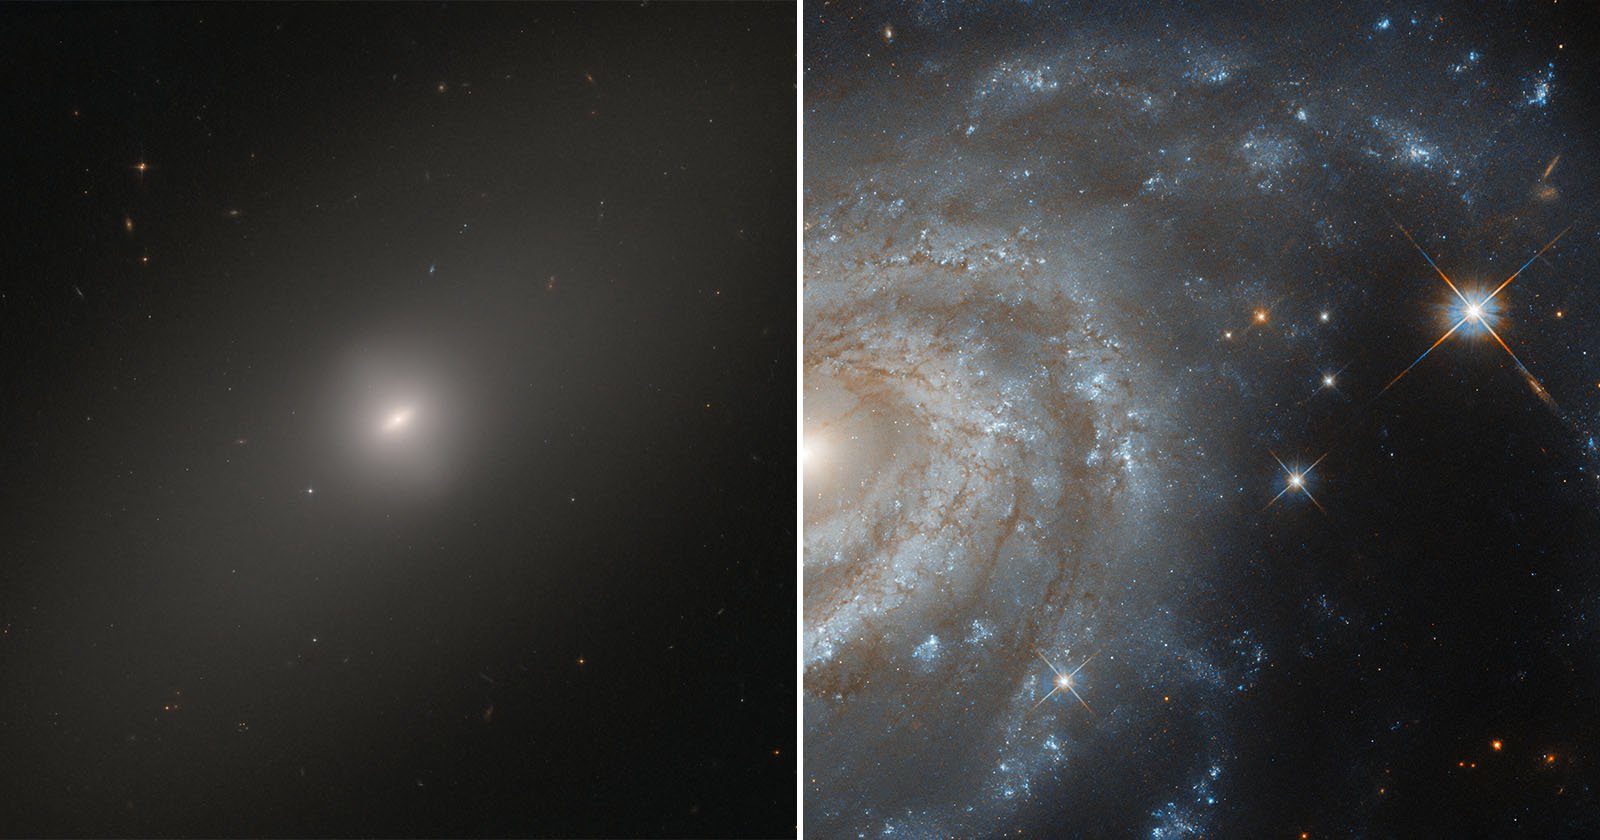 Hubble Shows a Peaceful, Aged Galaxy and a Spiraled Supernova Remnant